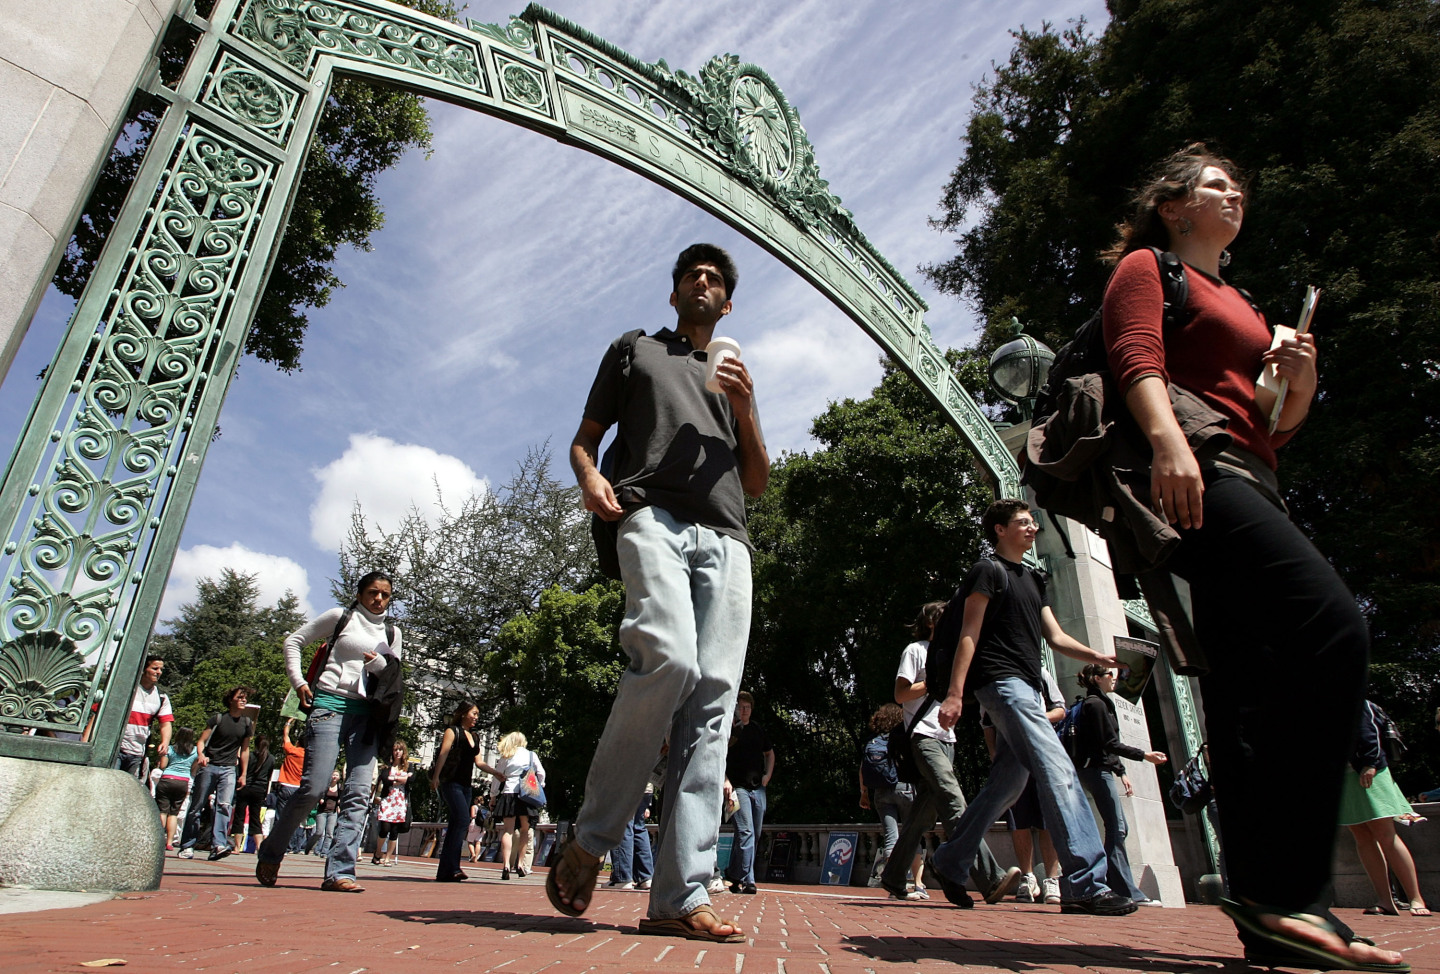 Students walk through Sather Gate on the UC Berkeley campus. (Justin Sullivan/Getty Images)